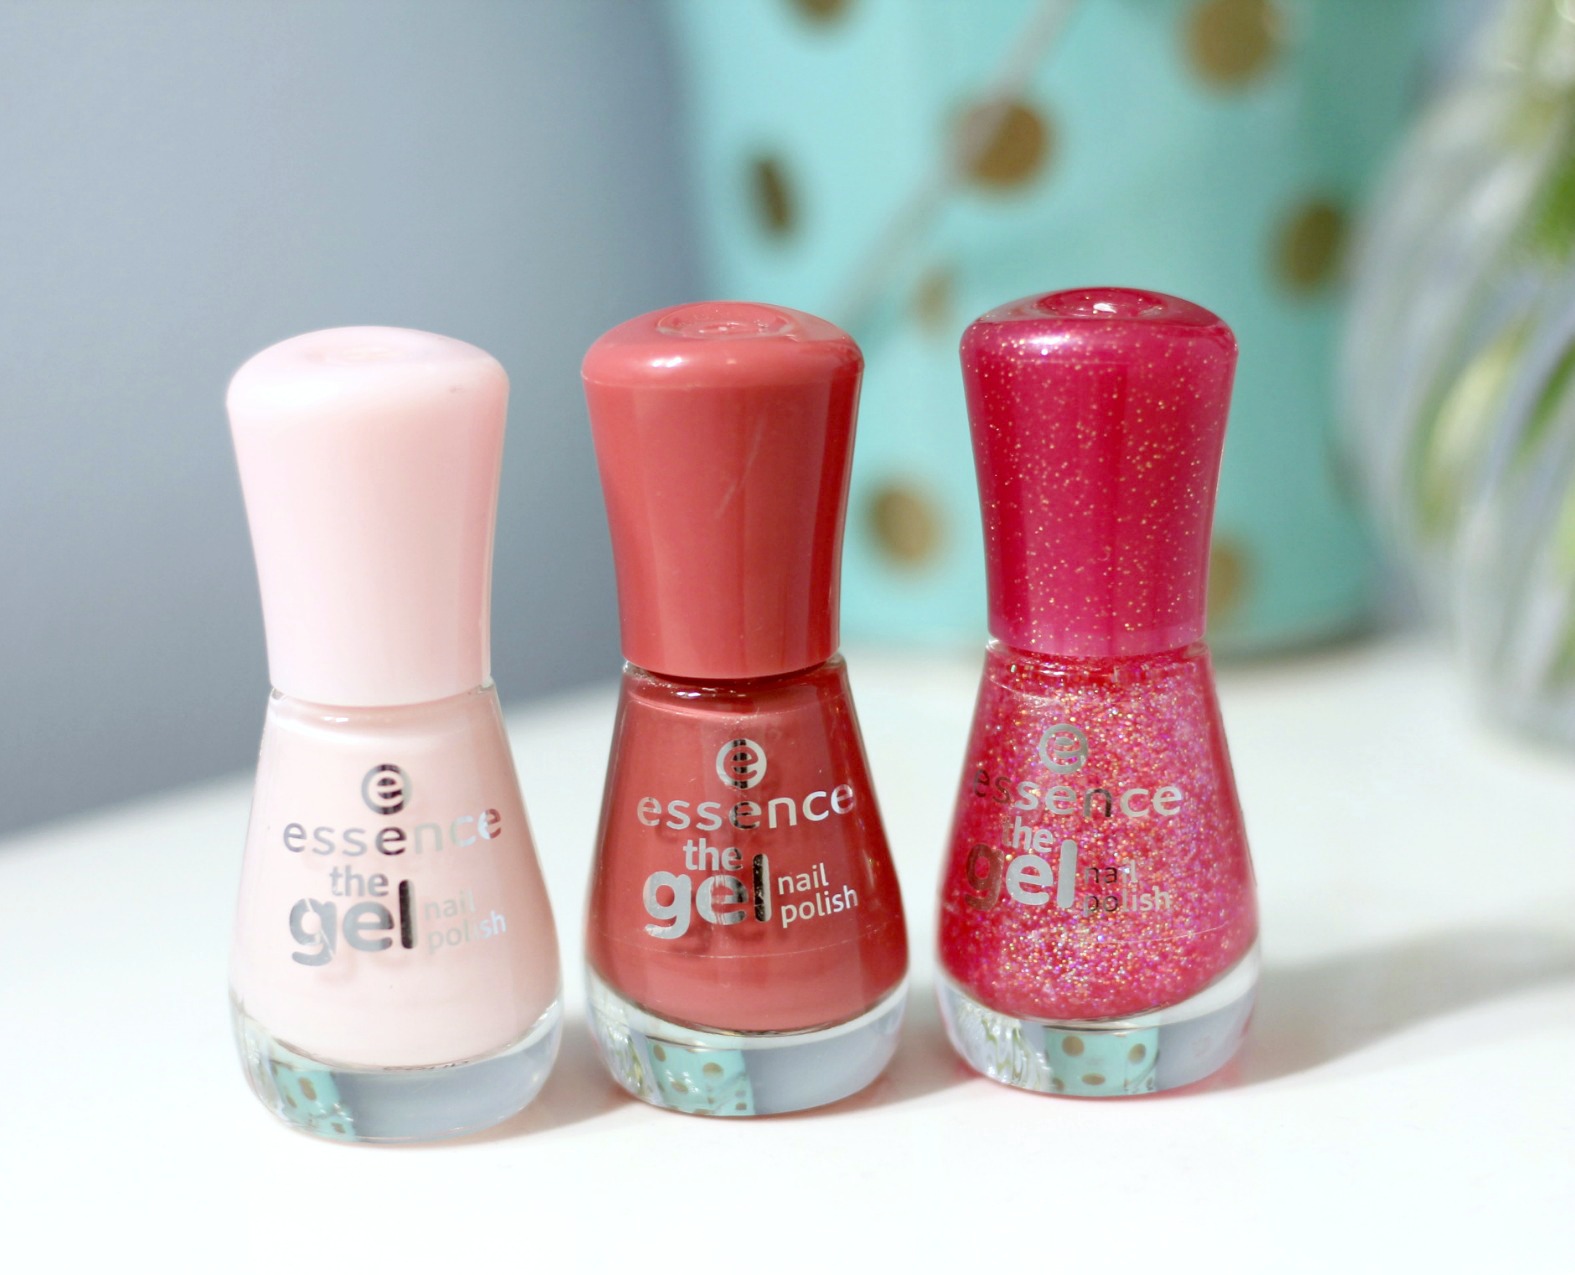 6. "Unexpectedly Chic" Nail Polish Collection by Butter London - wide 3